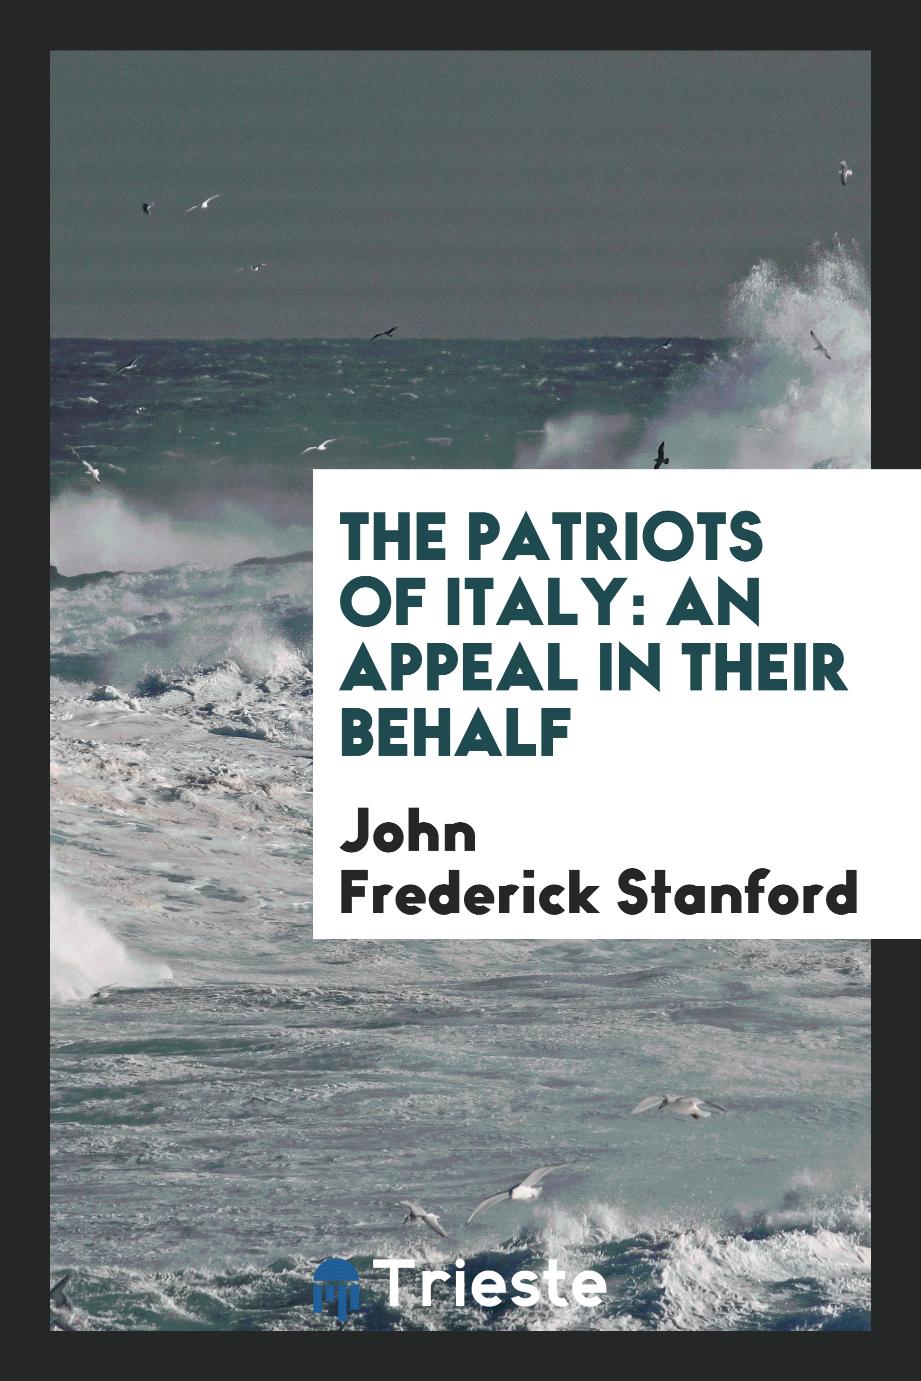 The patriots of Italy: an appeal in their behalf